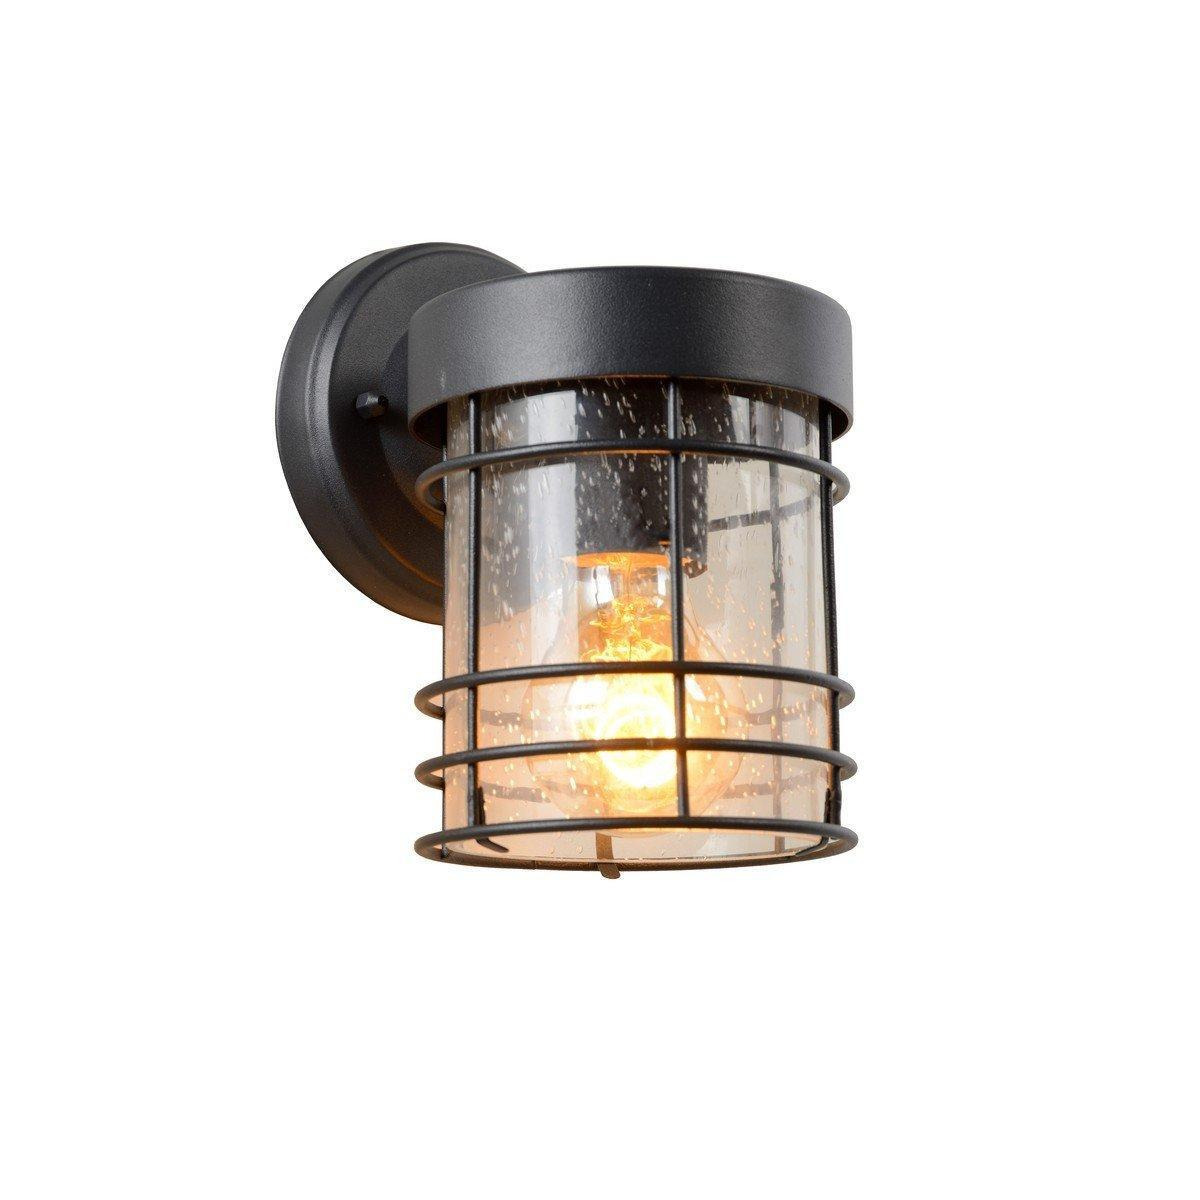 'KEPPEL' Dimmable Stylish Decor Outdoor Cottage Wall Lantern 1xE27 - image 1